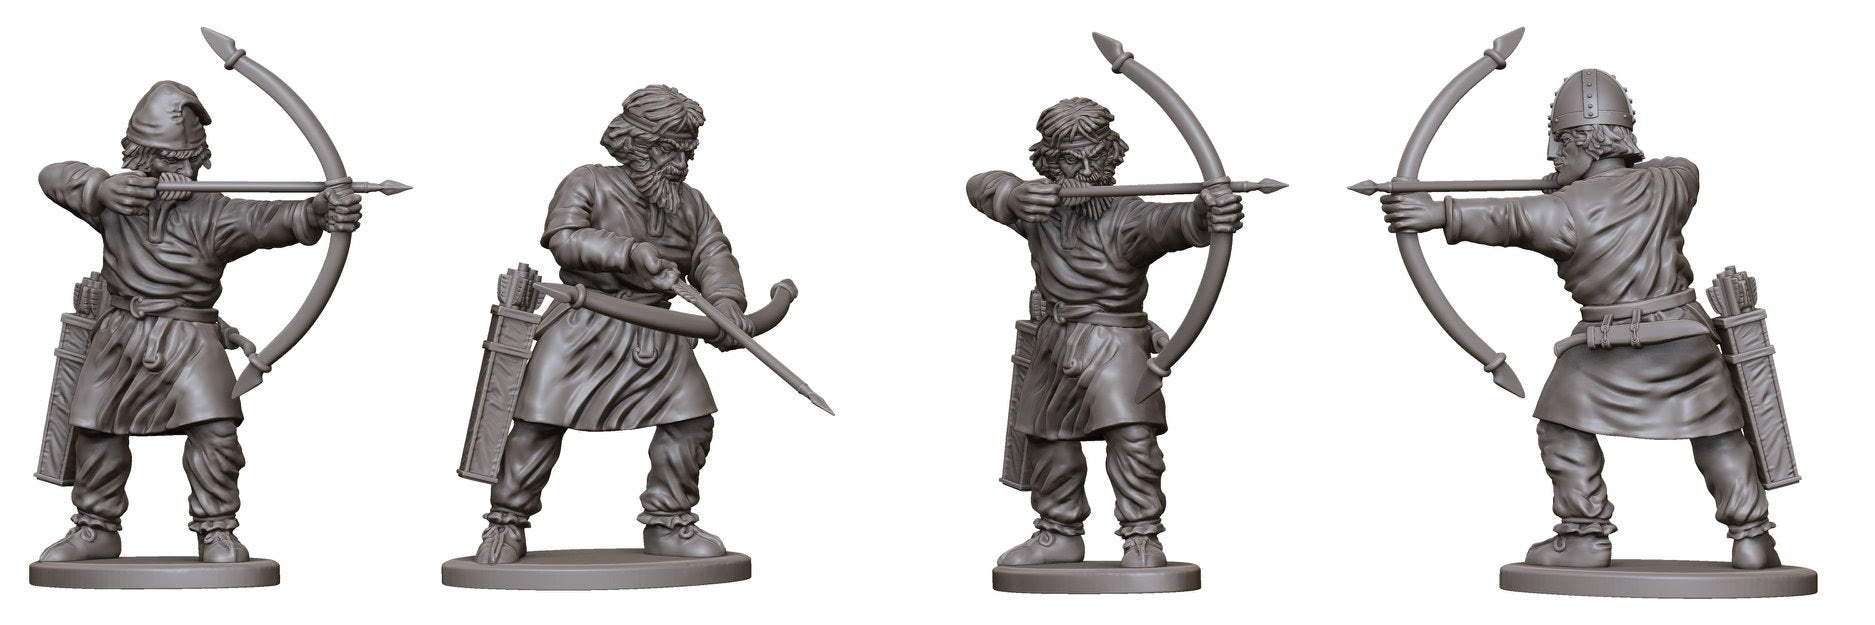 Upcoming Release: Dark Age Archers